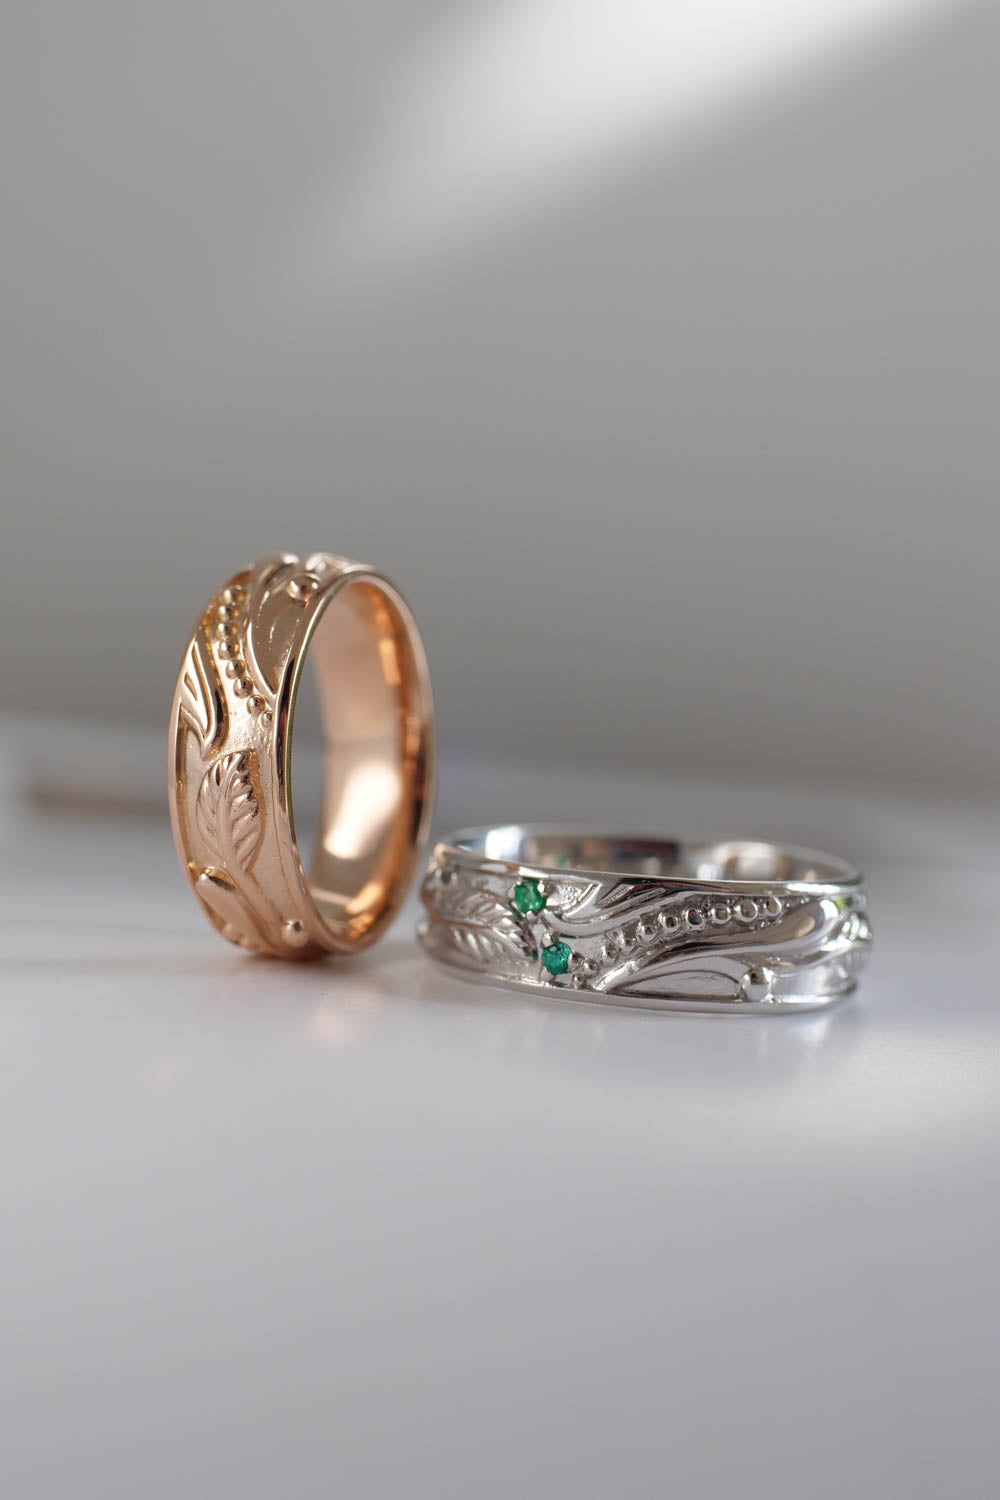 wedding bands for men, rose or white gold, with leaves details. nature inspired ring design